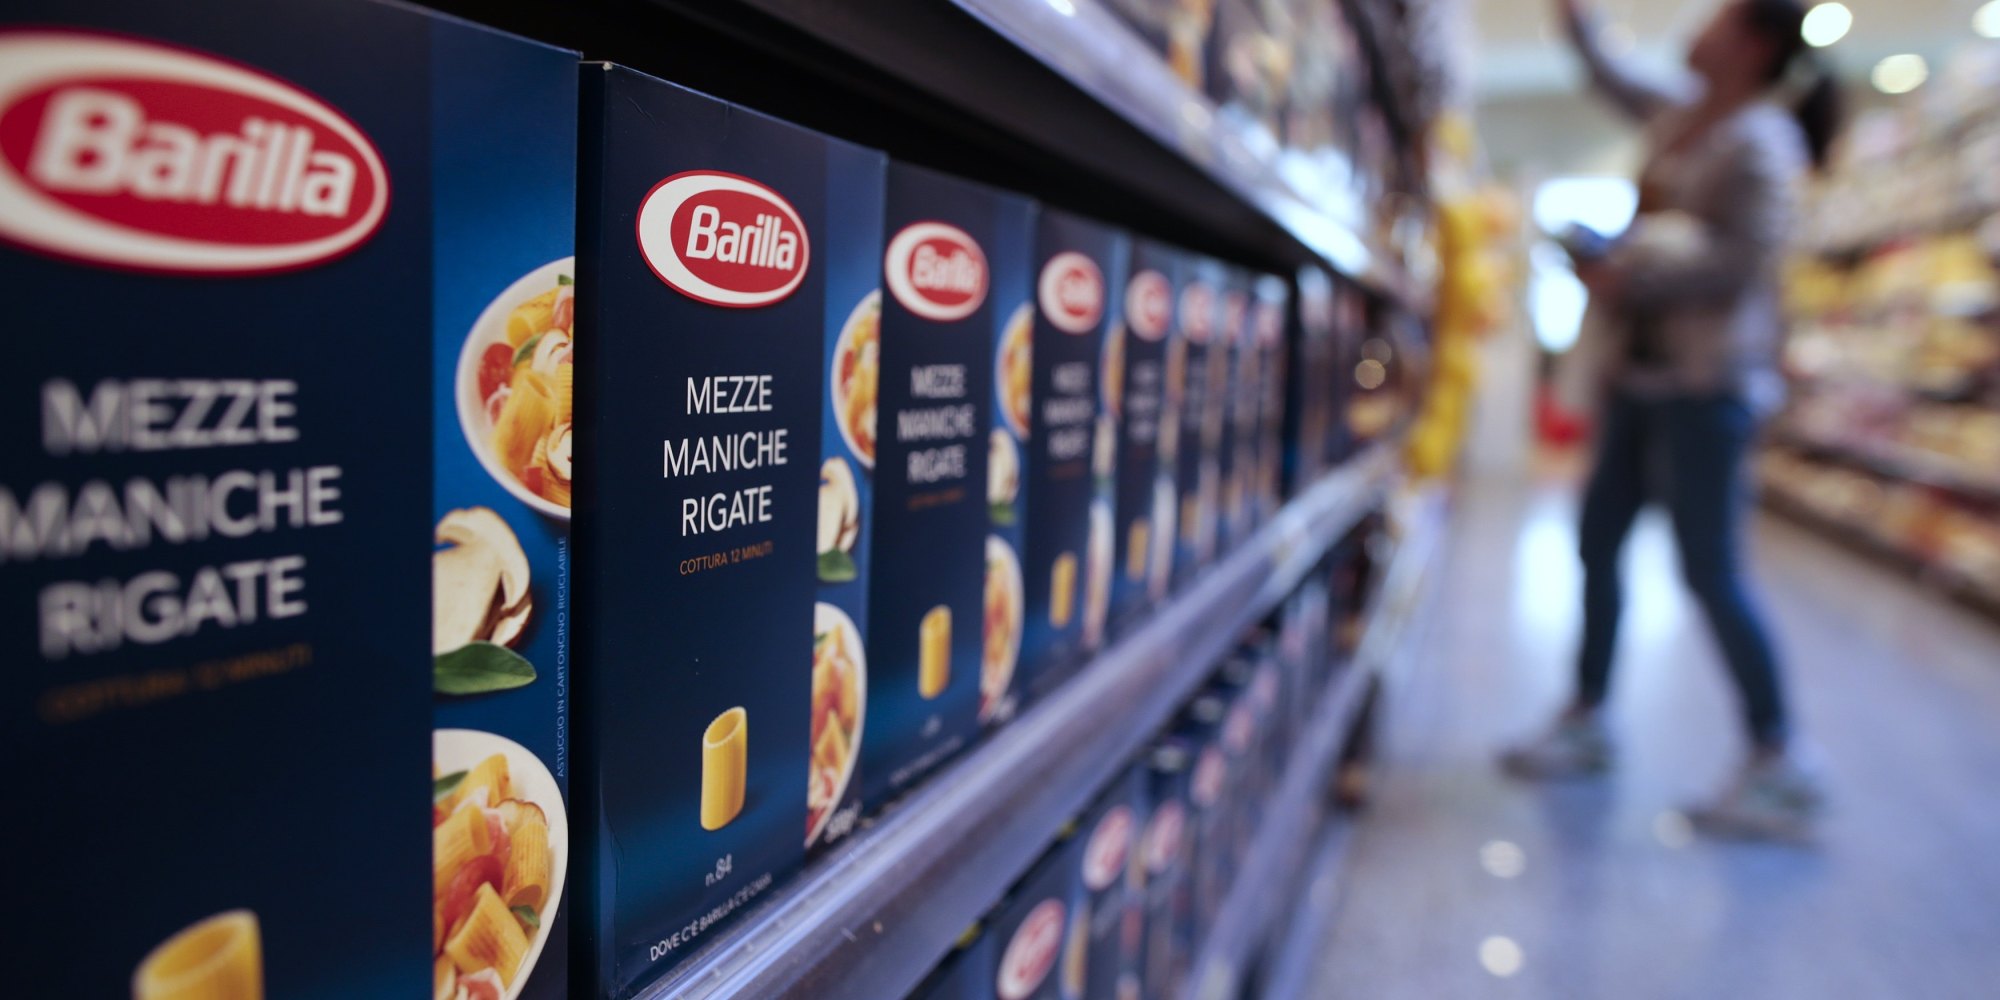 Packs of Barilla pasta are seen in a supermarket in Rome September 27, 2013. Guido Barilla, chairman of the world's leading pasta manufacturer, prompted calls for a consumer boycott on Thursday after telling Italian radio his company would never use a gay family in its advertising. Barilla - one of the best known pasta brands around the world - is one of Italy's biggest advertisers, and for many years has used the image of a happy family living in an idealized version of the Italian countryside, with the slogan: "Where there's Barilla, there's home." REUTERS/Tony Gentile (ITALY - Tags: FOOD SOCIETY BUSINESS)